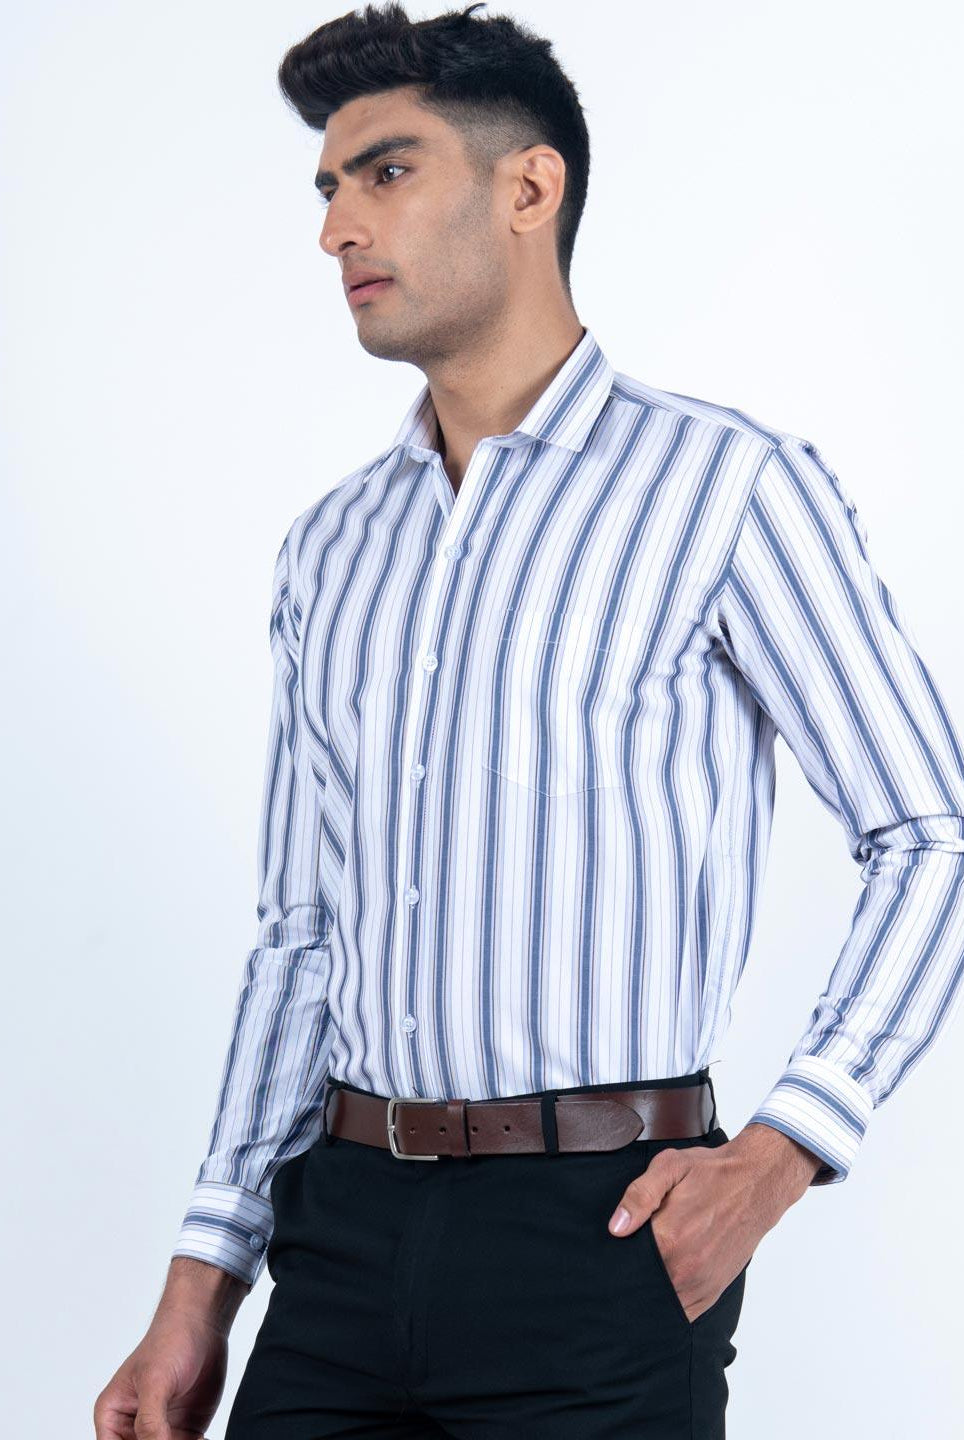 White and Blue Stripes Printed Cotton Shirt - Tistabene